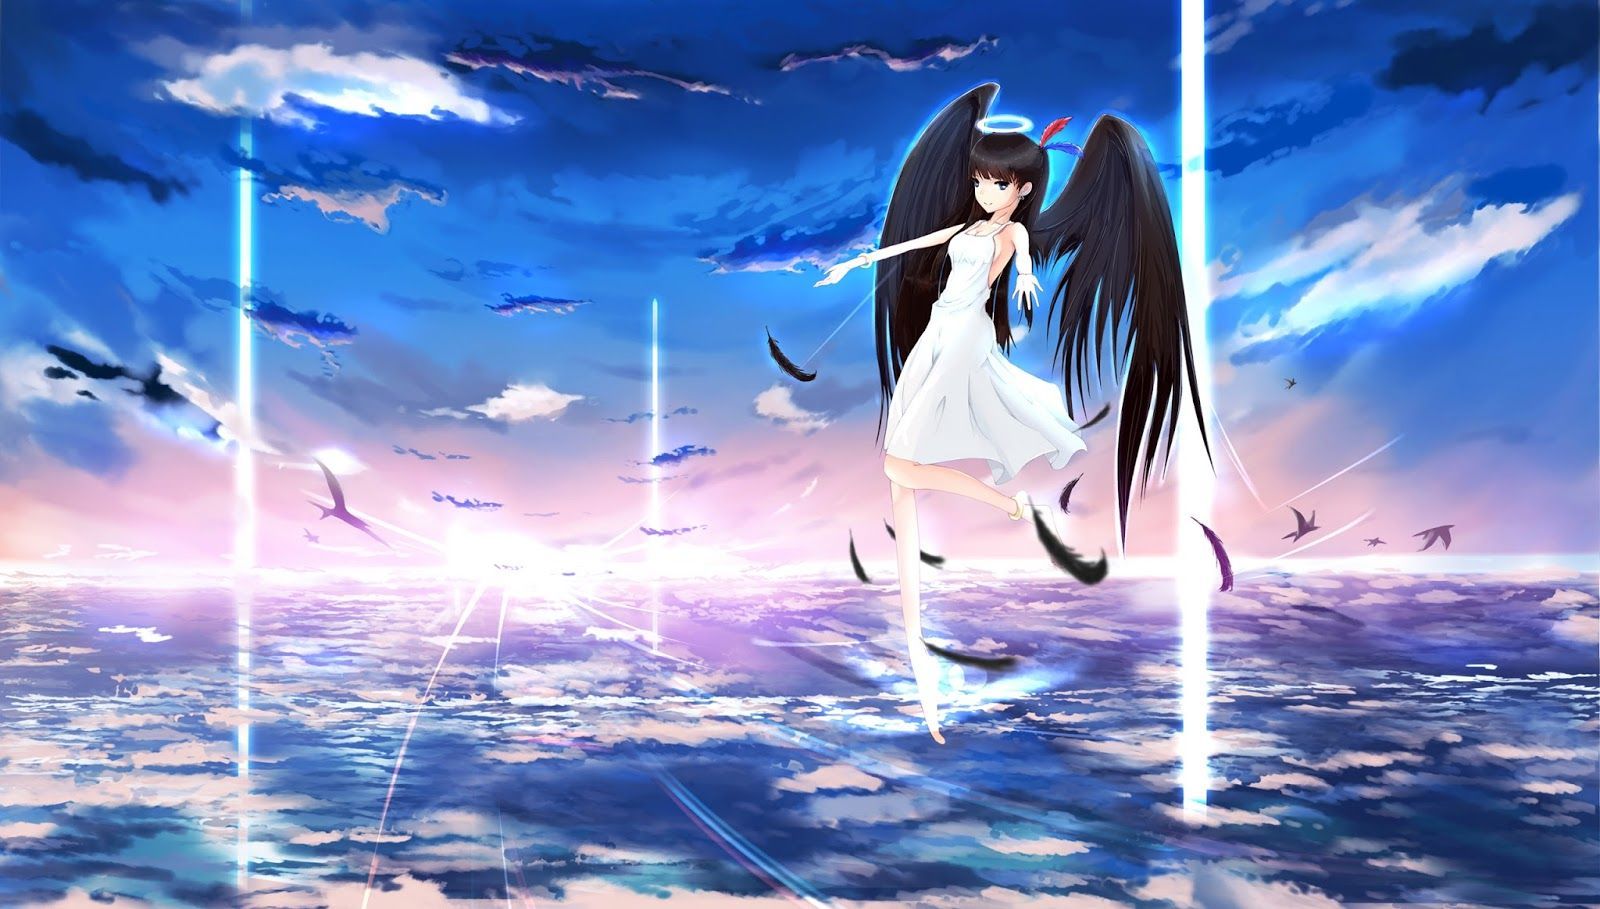 Angel Anime girl clouds sea wallpaper | Wallpapers, Backgrounds ...